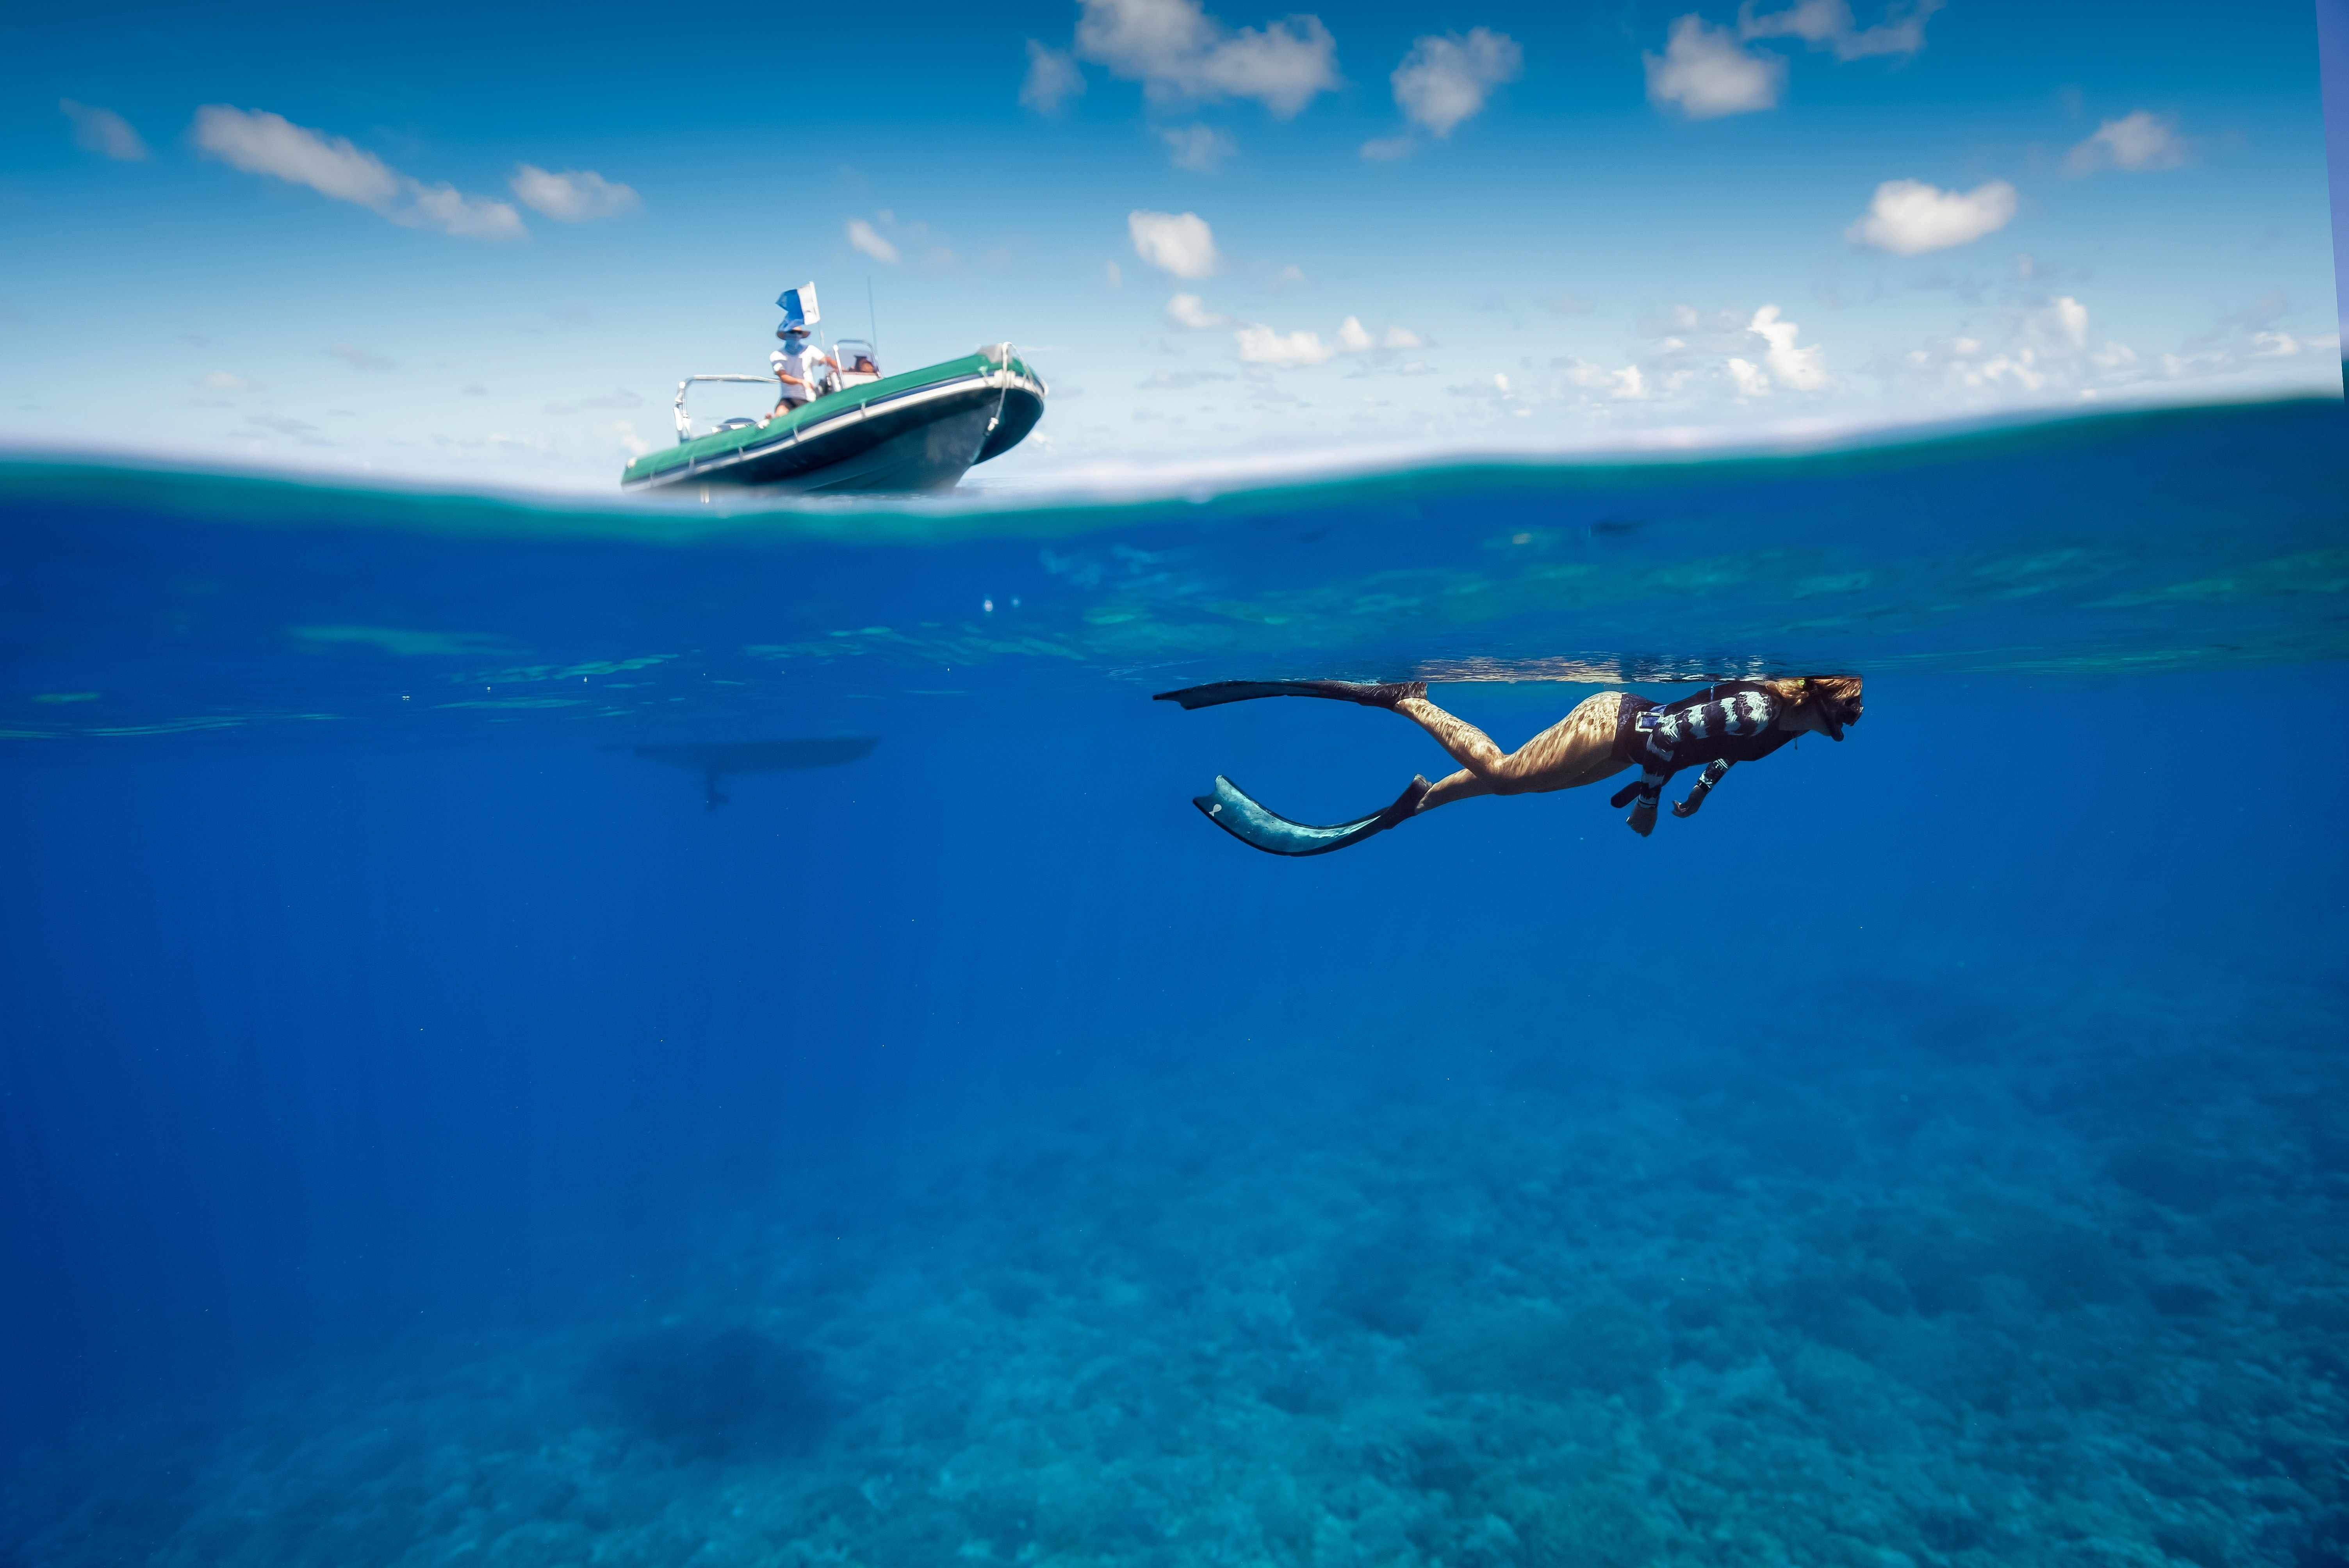 Swimming is a great way to enhance the sailing experience and feel a deeper connection to the sea